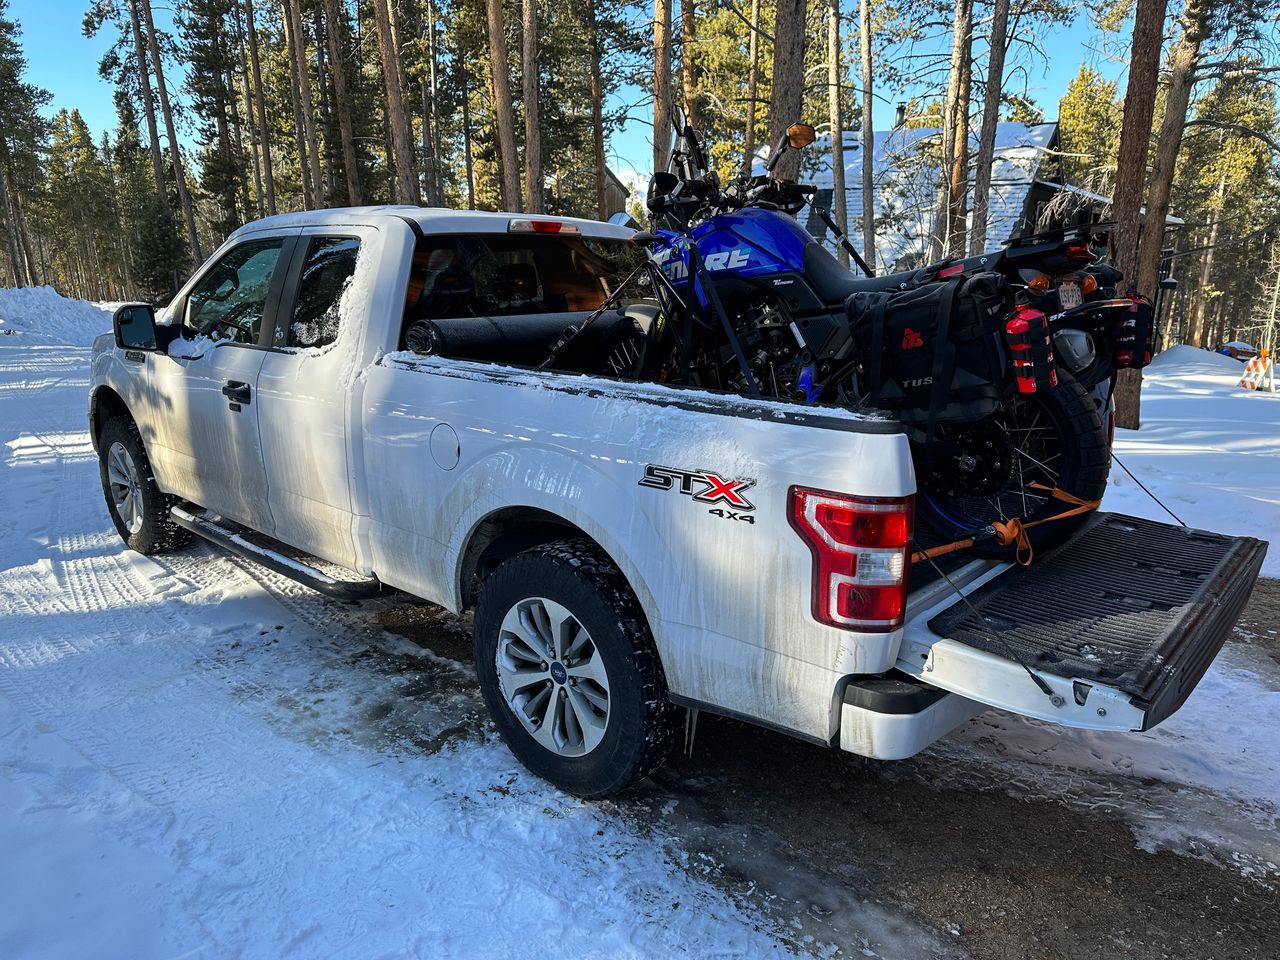 Leaving Leadville with the new T7.  Loading in the snow and ice was less than ideal!